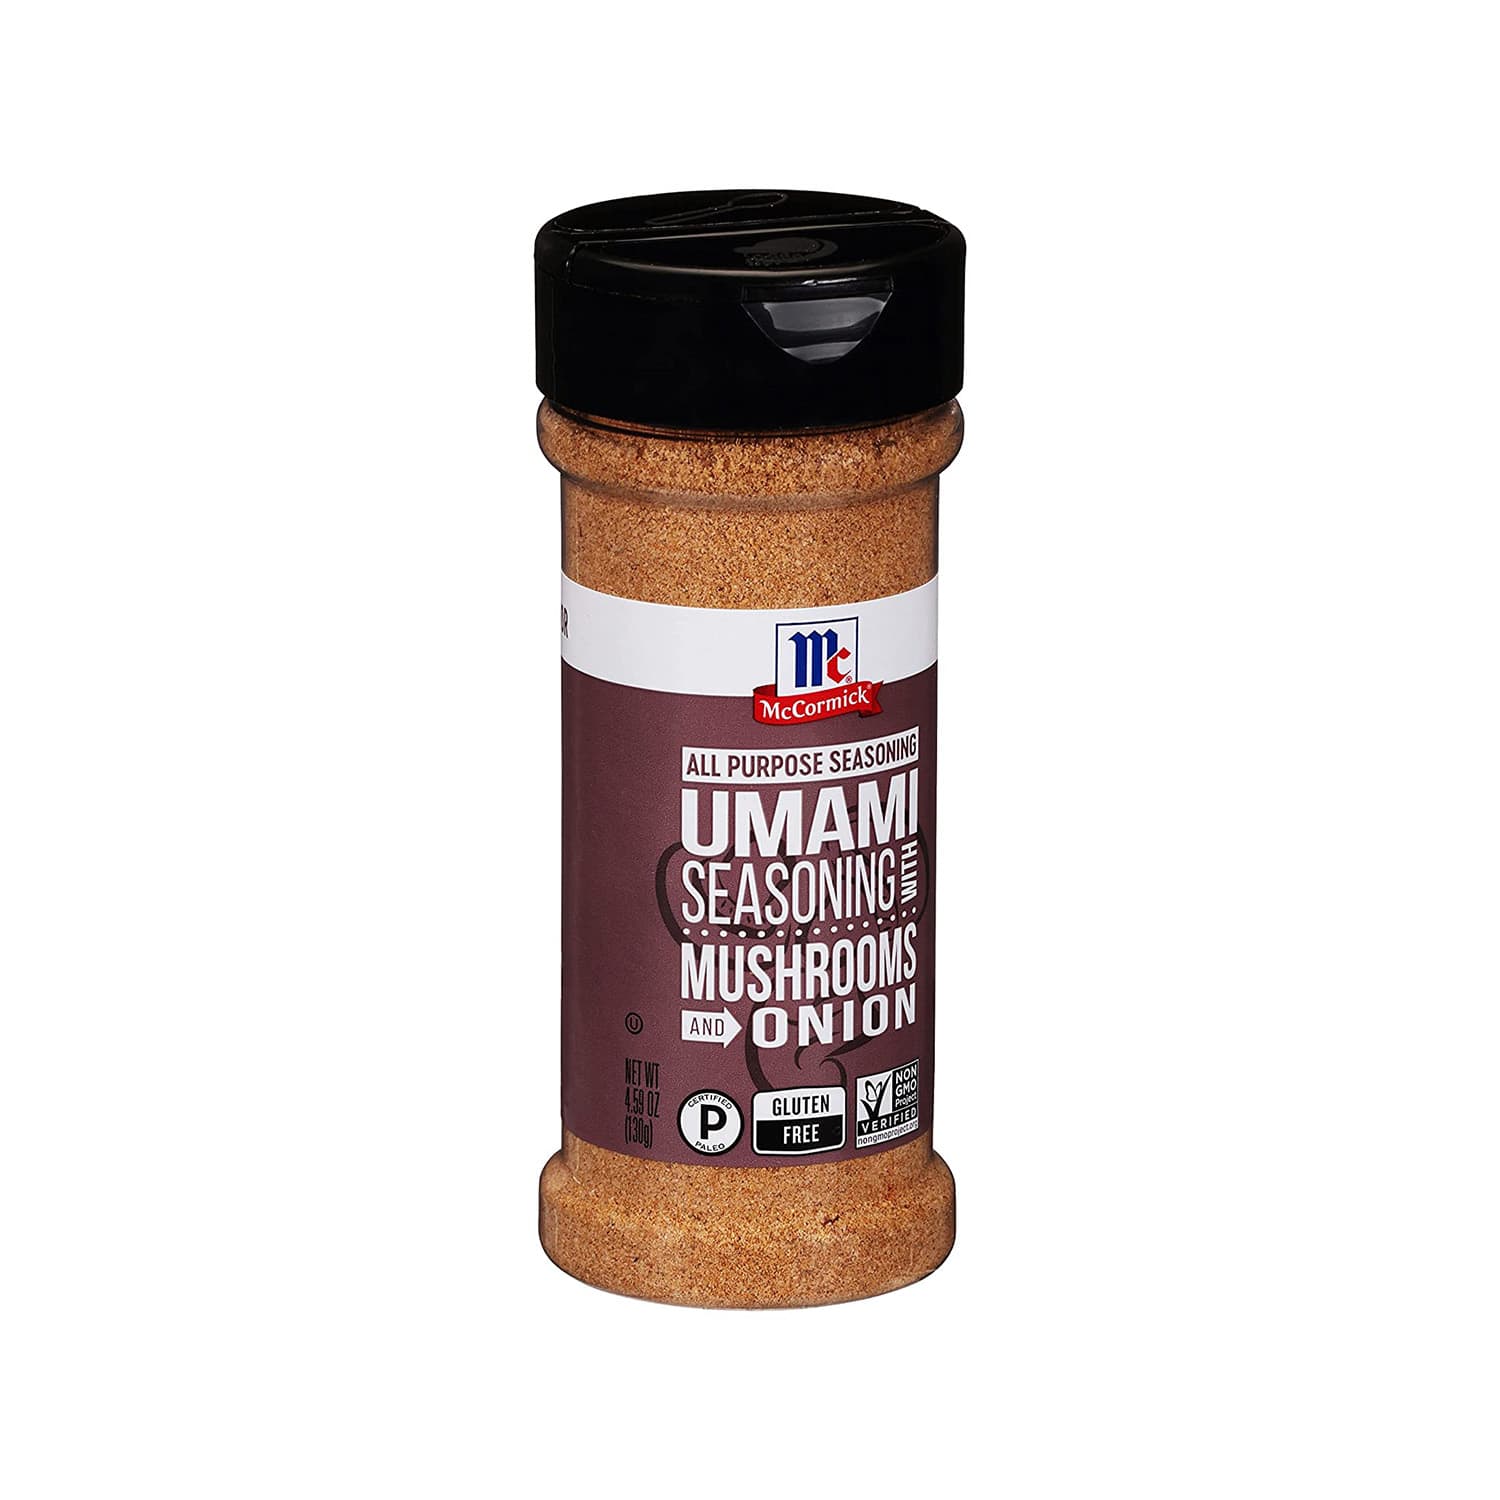 https://cdn.apartmenttherapy.info/image/upload/v1685720982/k/Edit/2023-06-chef-approved-spice-blends/mccormick-umami-seasoning-mushrooms_and_Onion.jpg